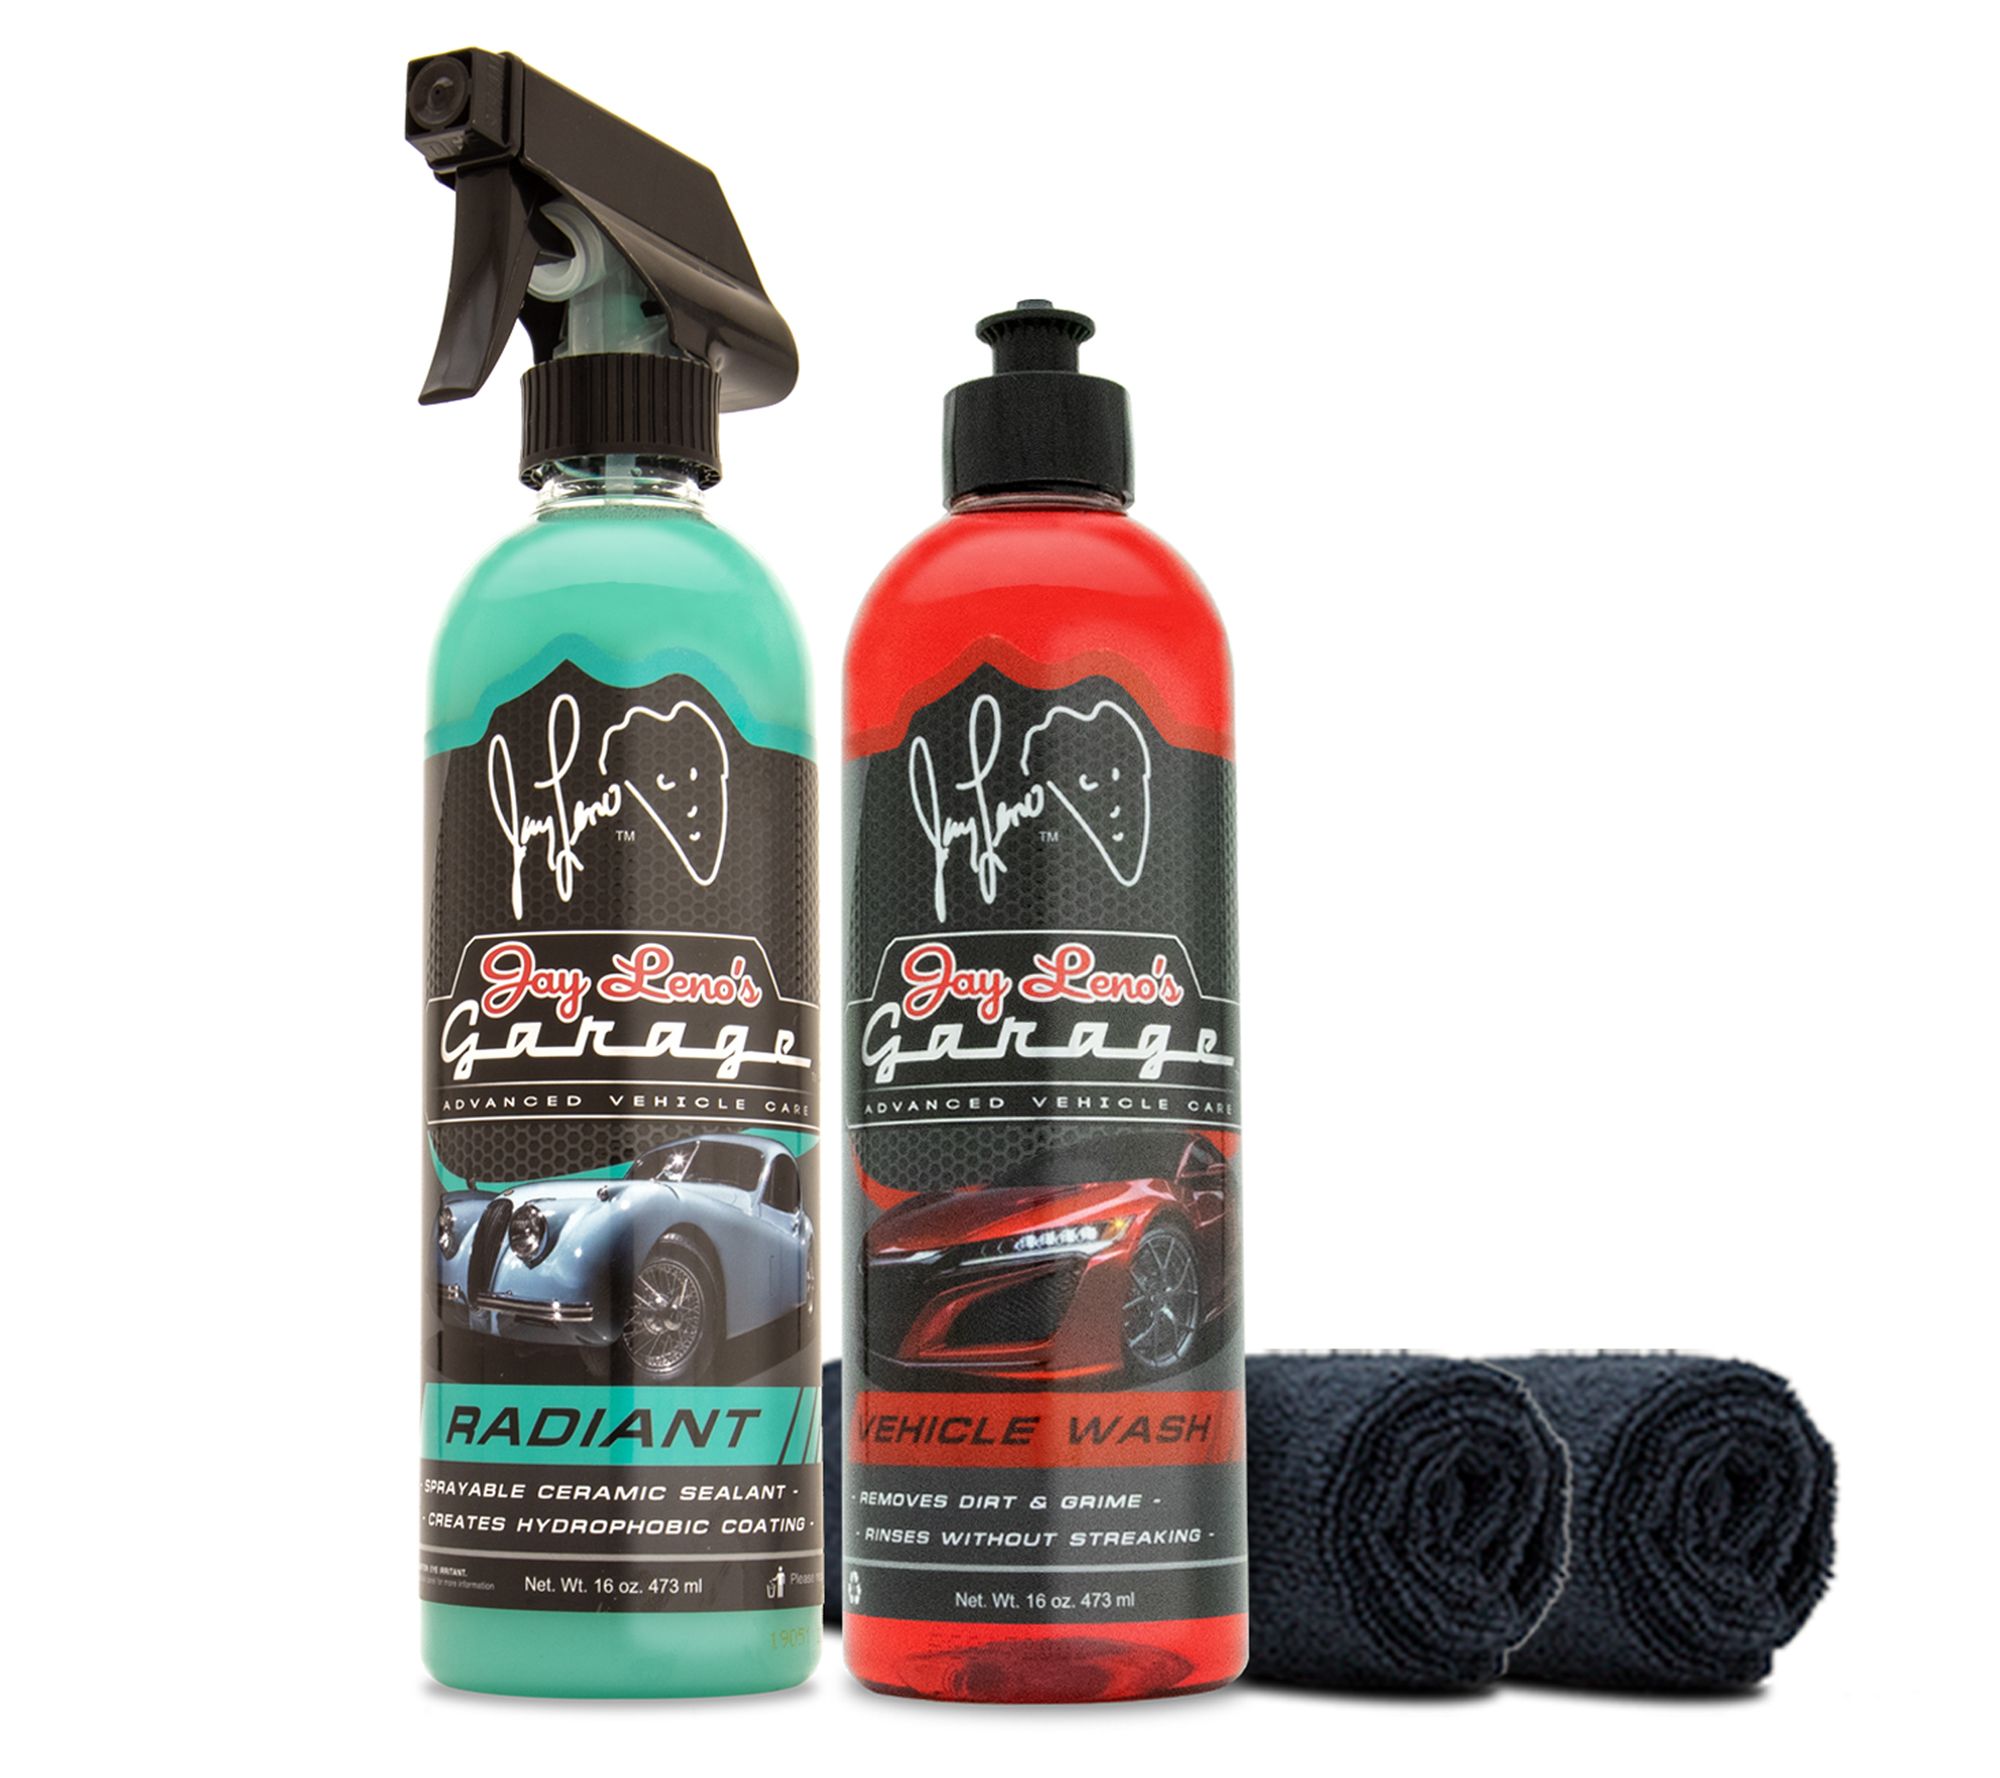 Detail Garage - Microfiber wash! We get asked all the time how to